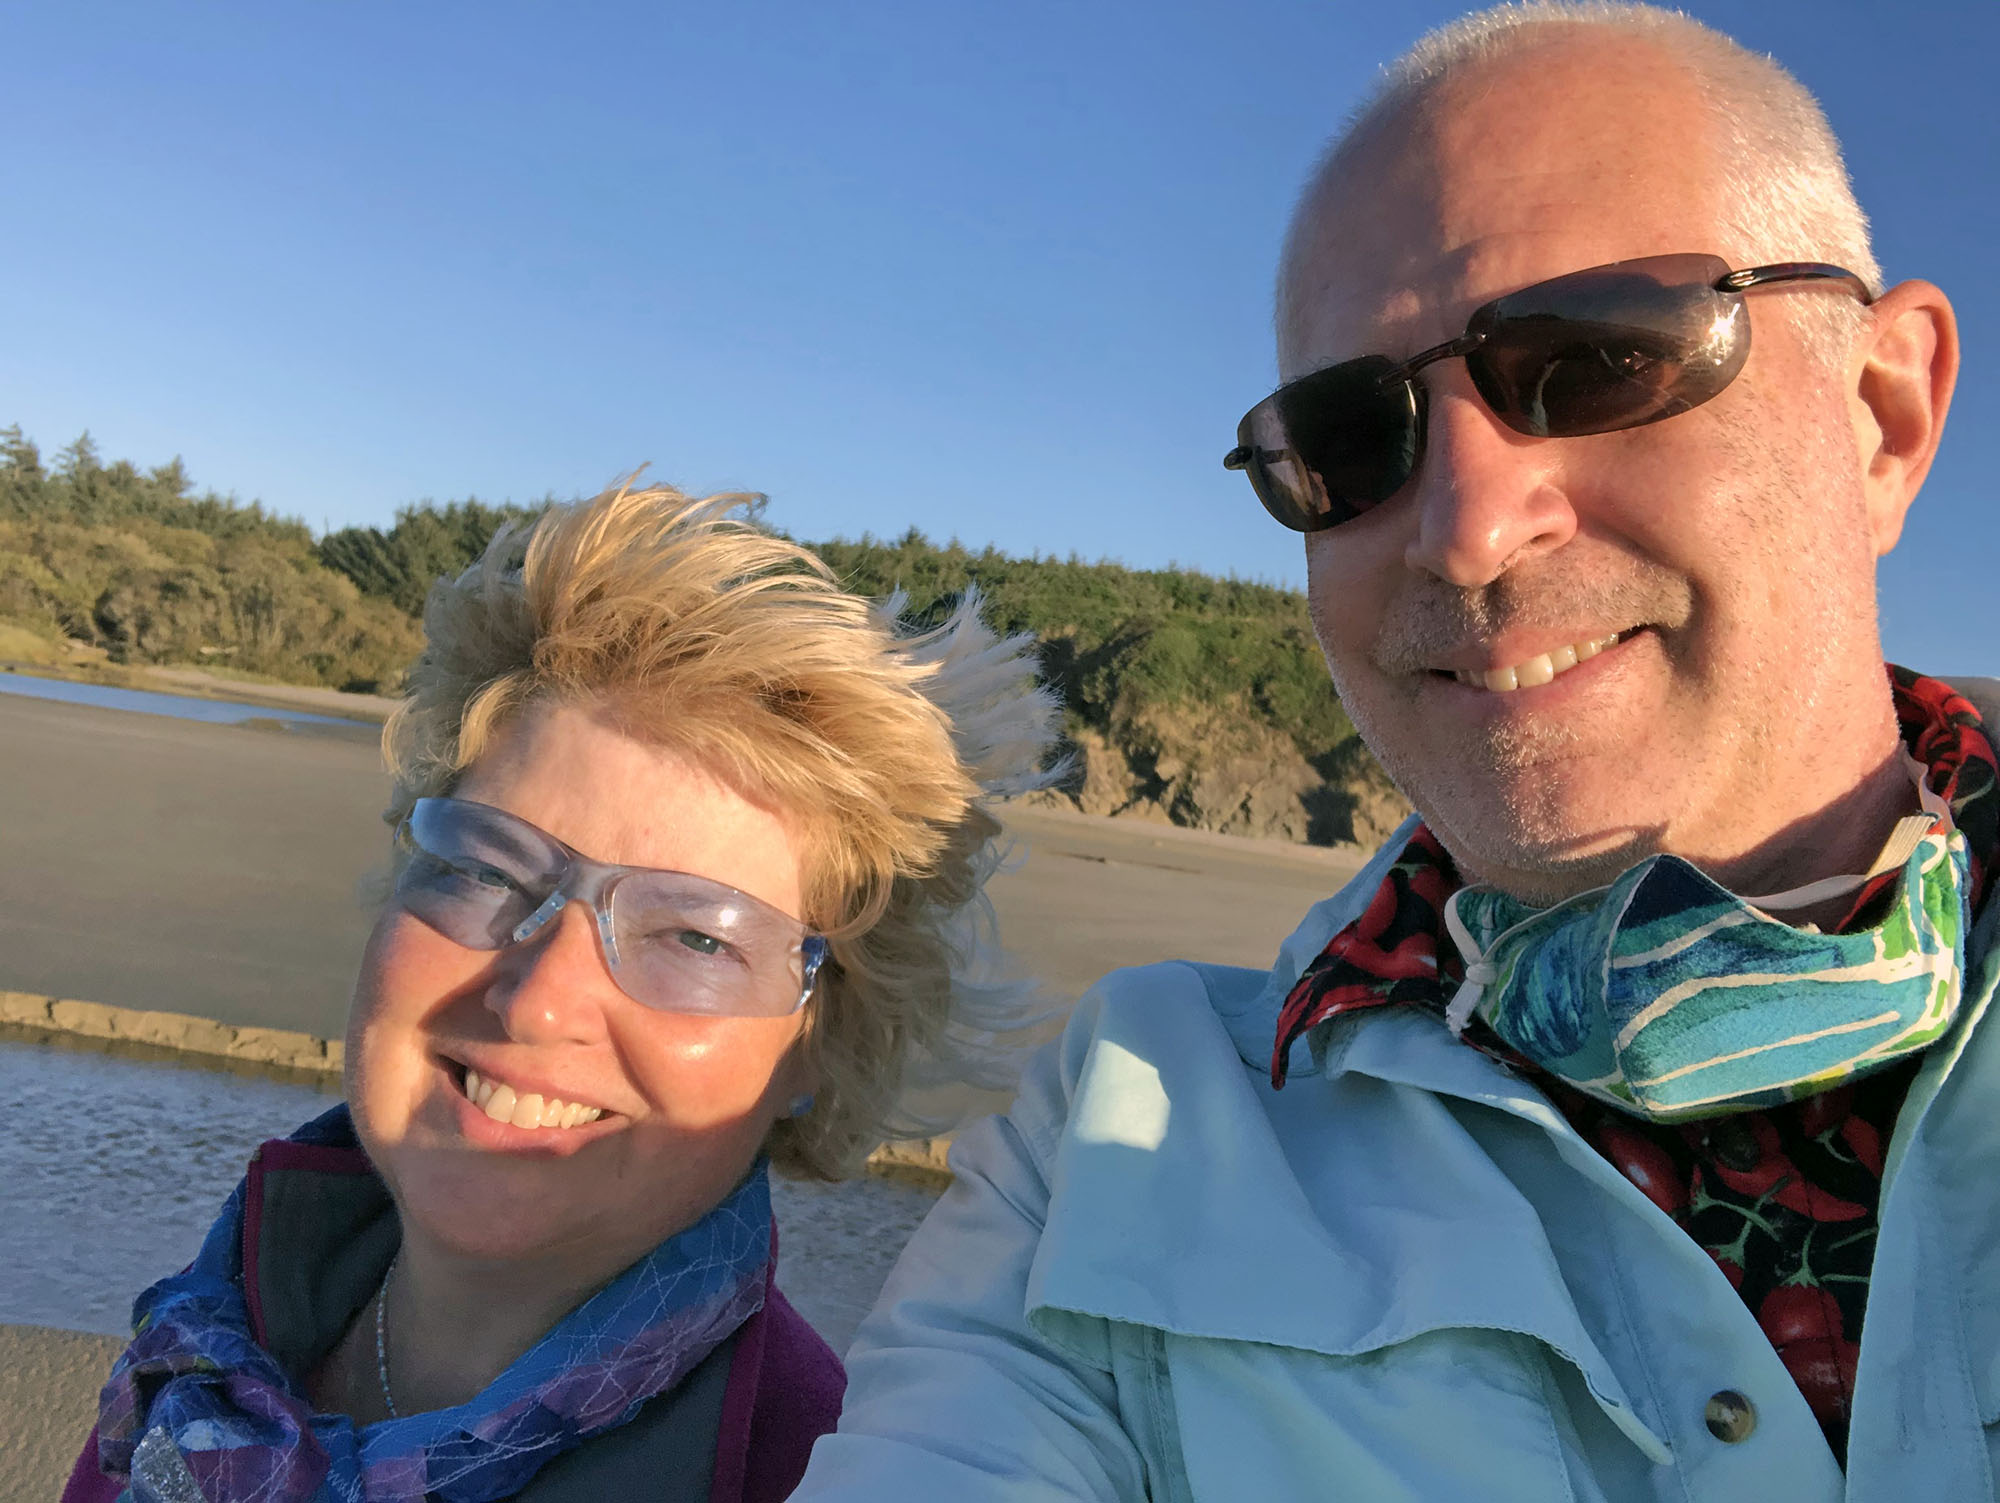 Our sunglasses are being scratched by flying sand, but getting photos and videos has given us a new appreciation for Oregon and teaching on location.